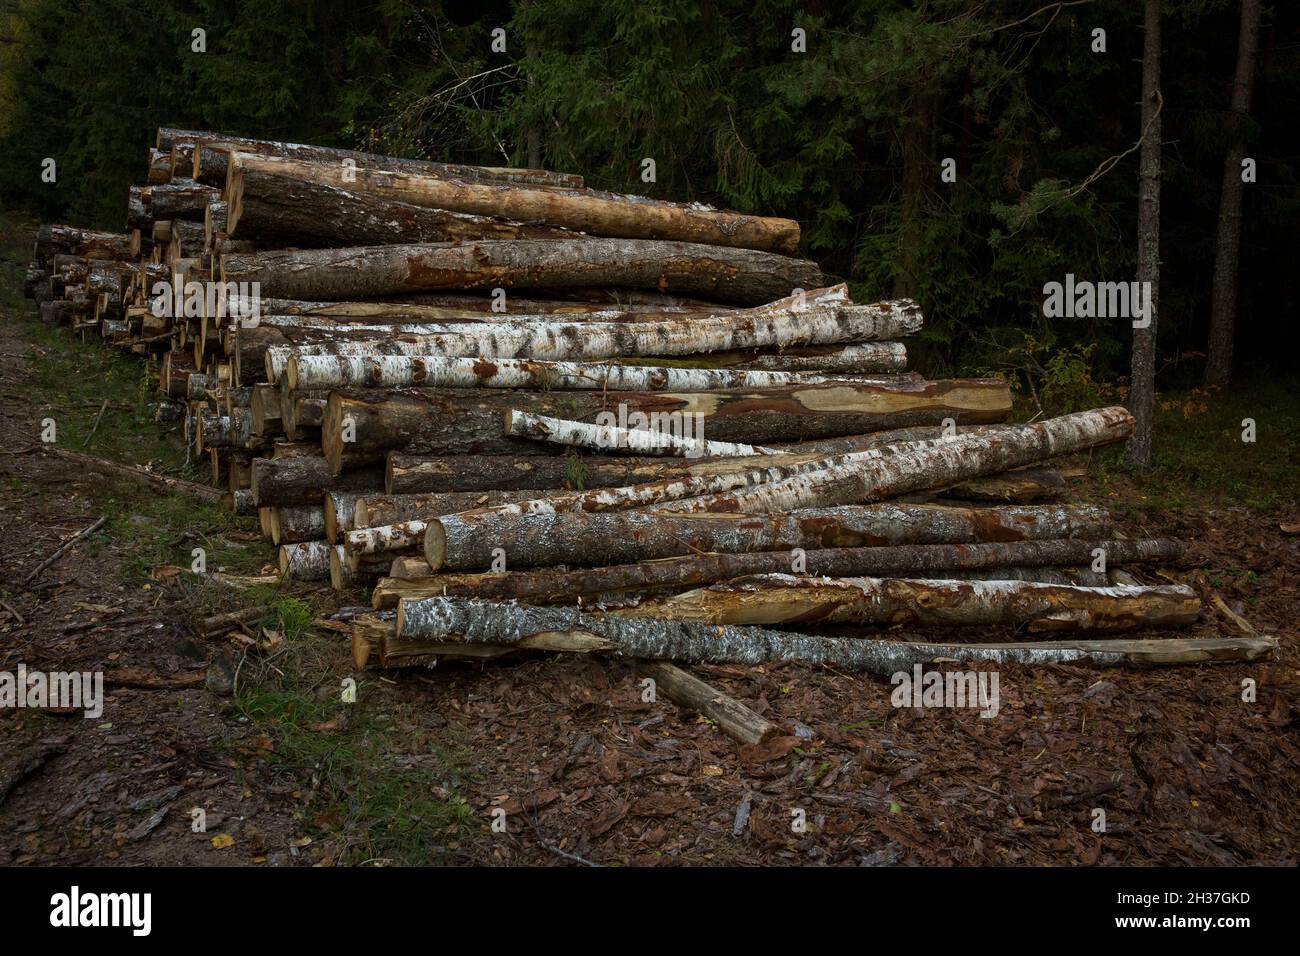 Log stacks along the forest road. Forest pine and spruce trees. Log trunks pile, the logging timber wood industry. Stock Photo